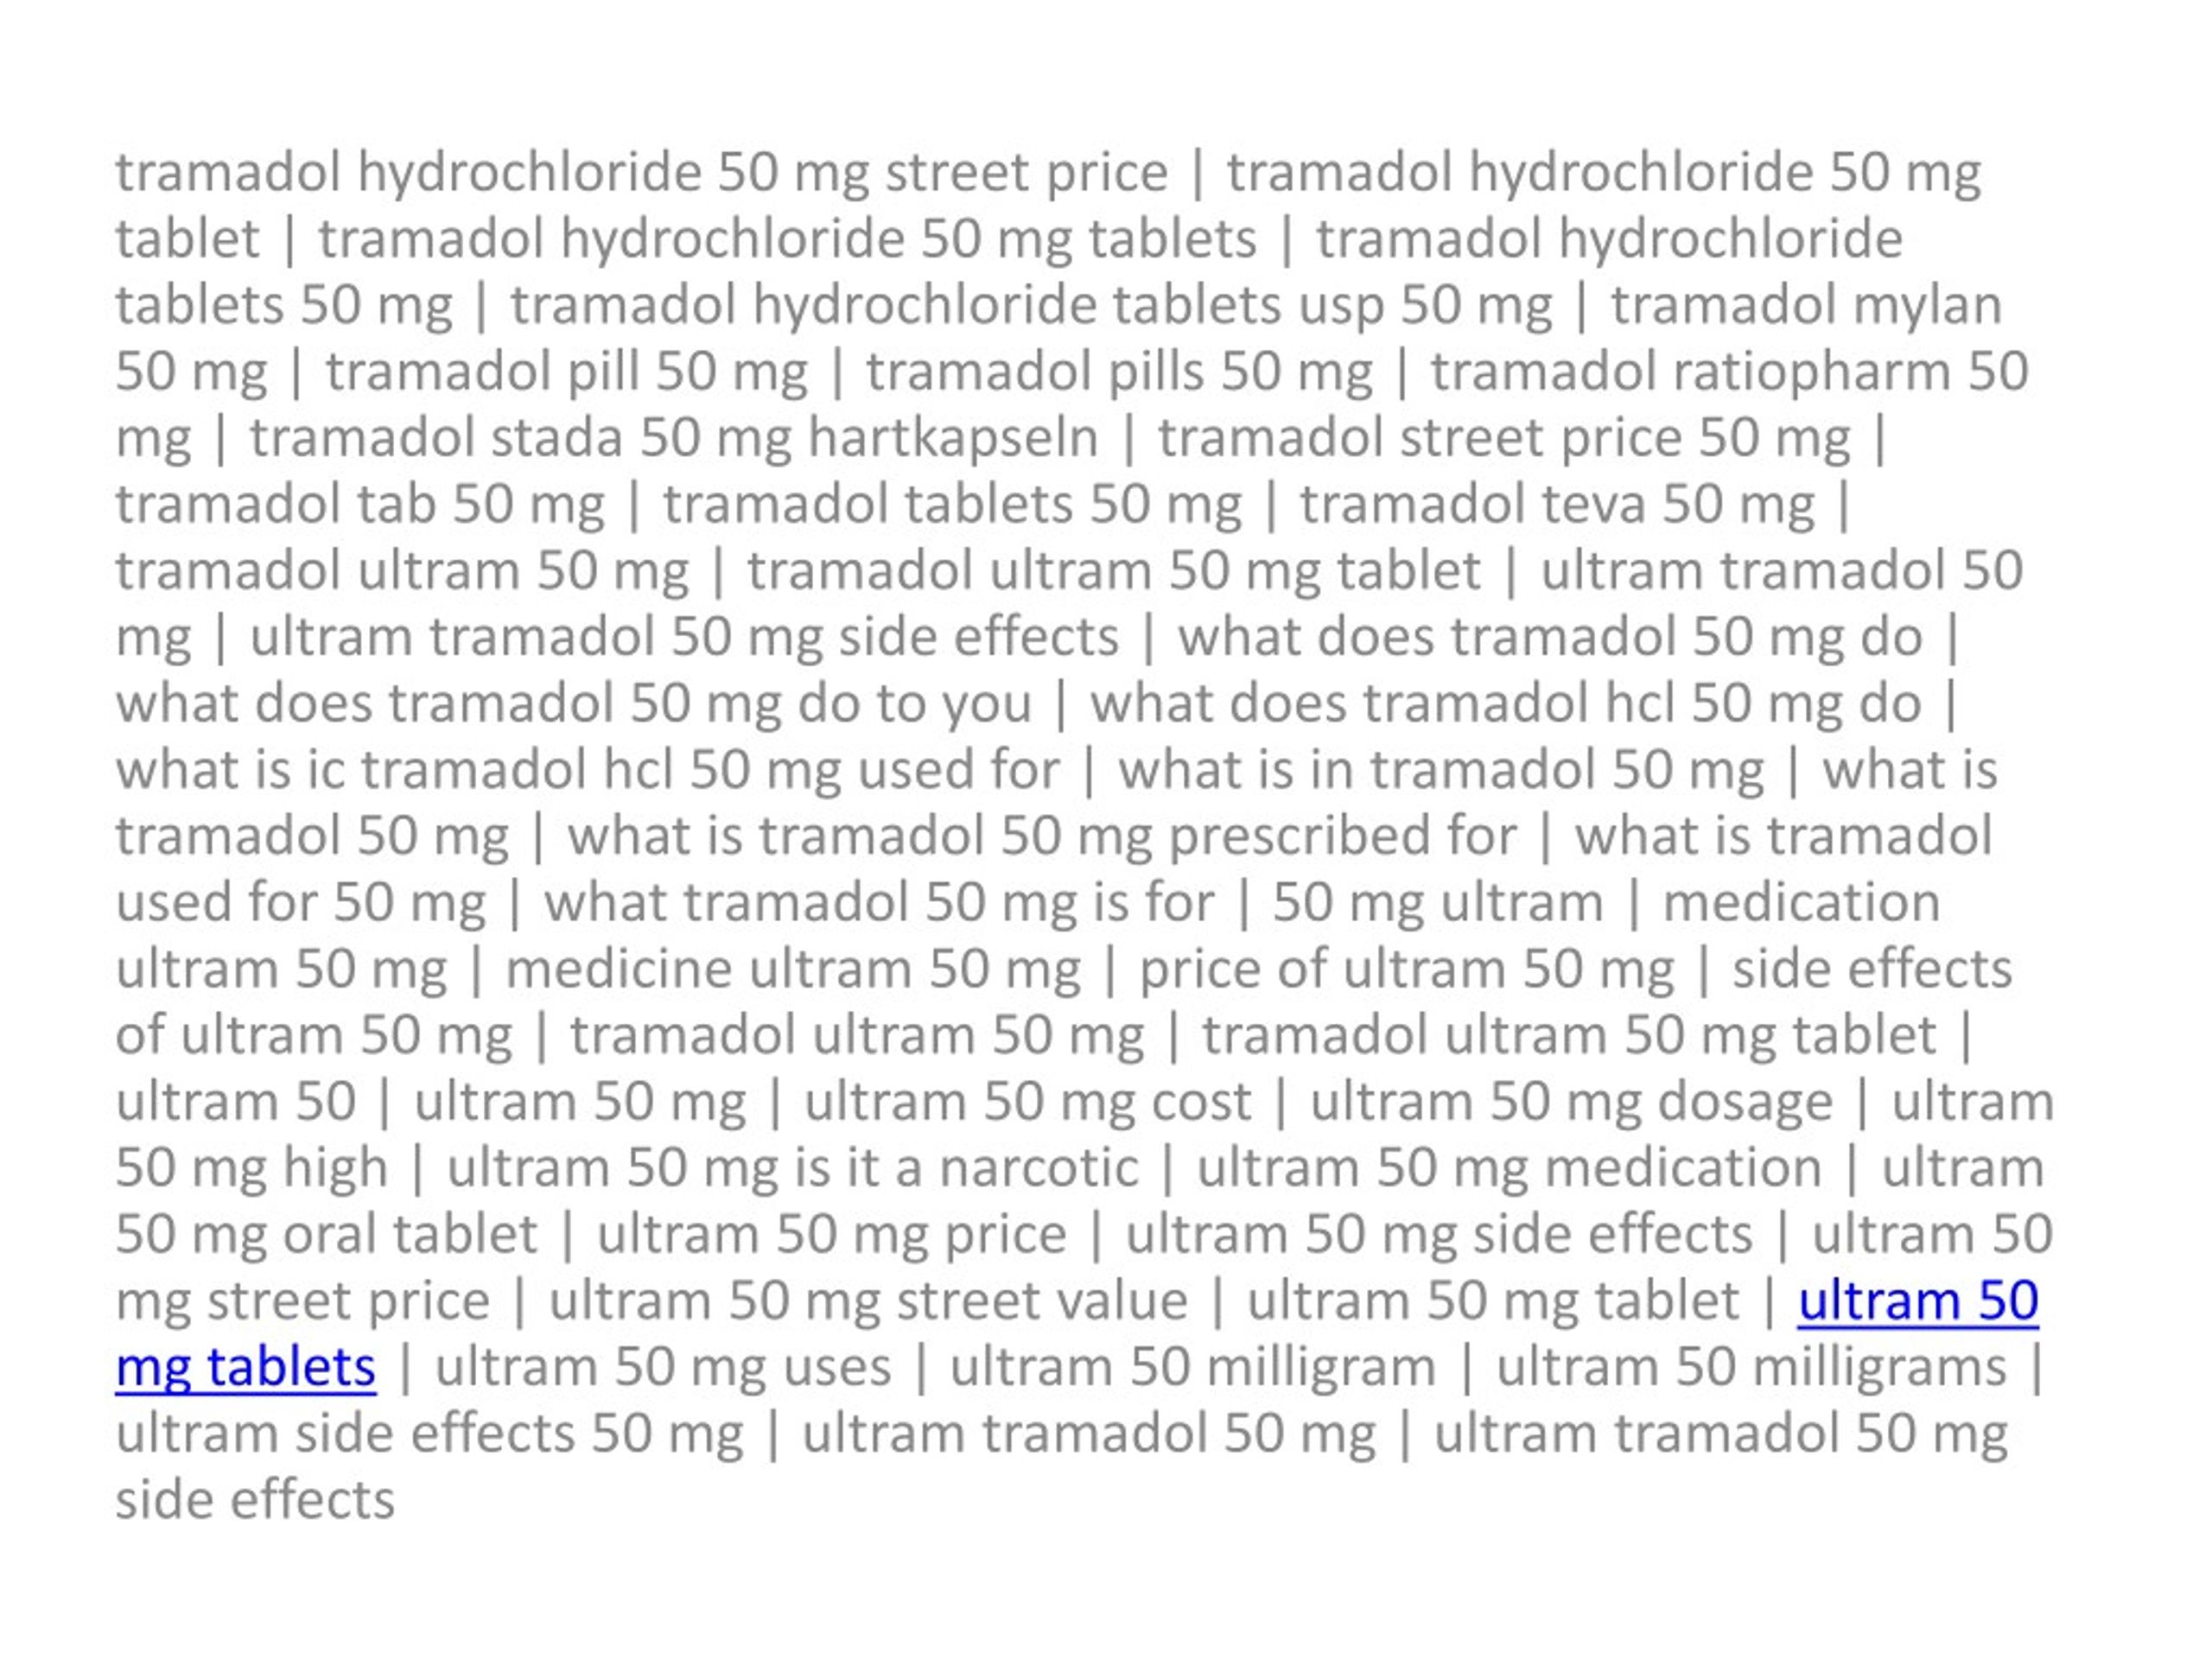 Price of tramadol on the street